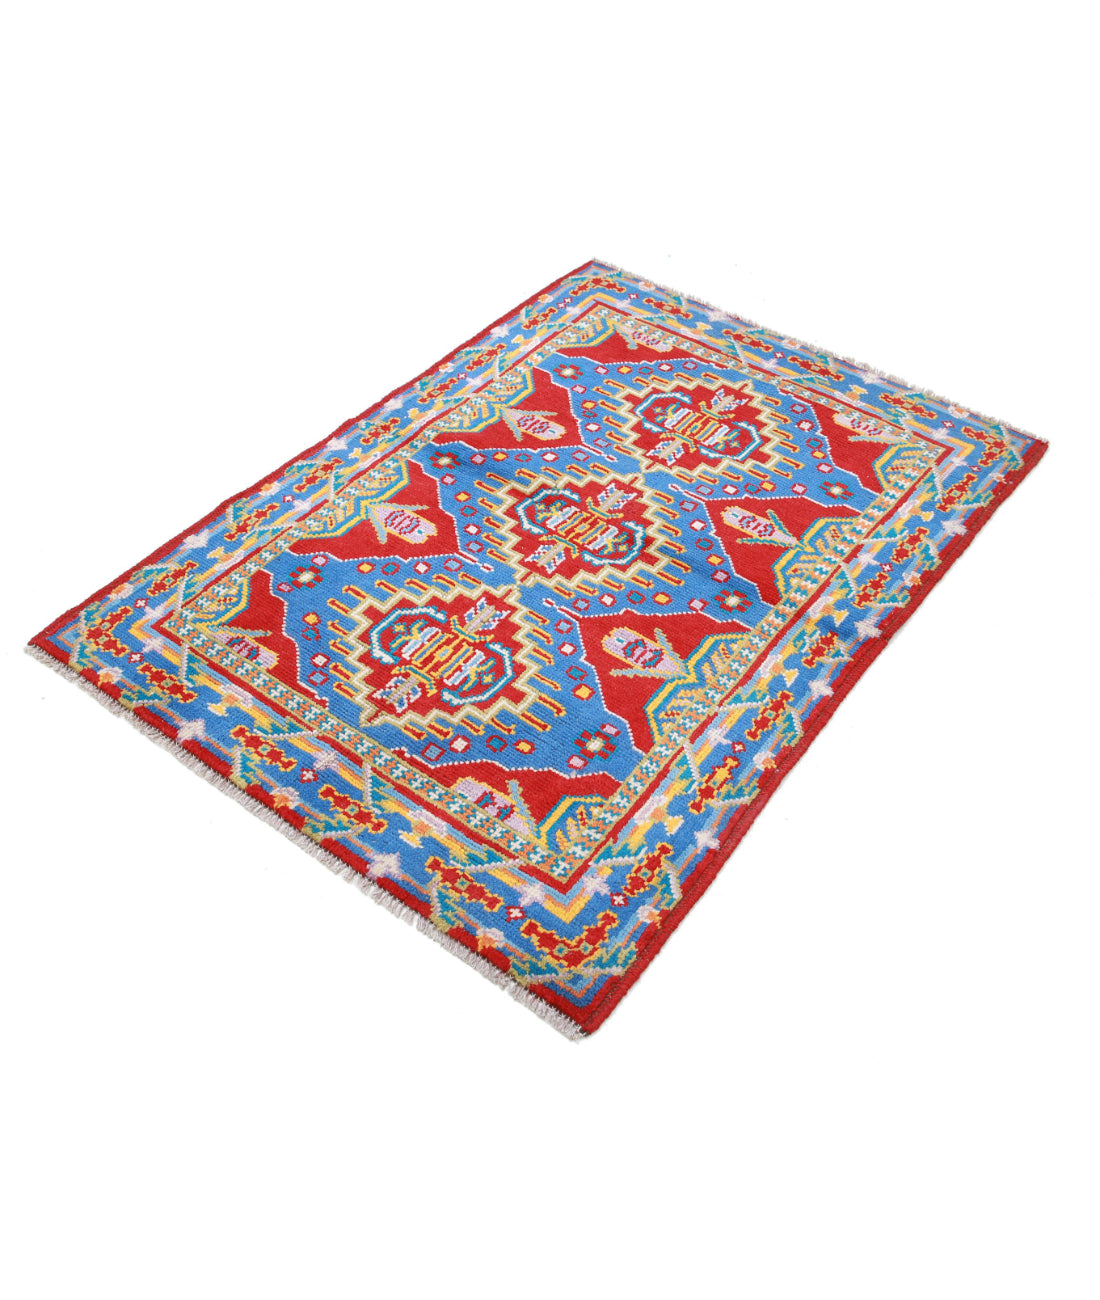 Revival 3'3'' X 4'9'' Hand-Knotted Wool Rug 3'3'' x 4'9'' (98 X 143) / Red / Blue